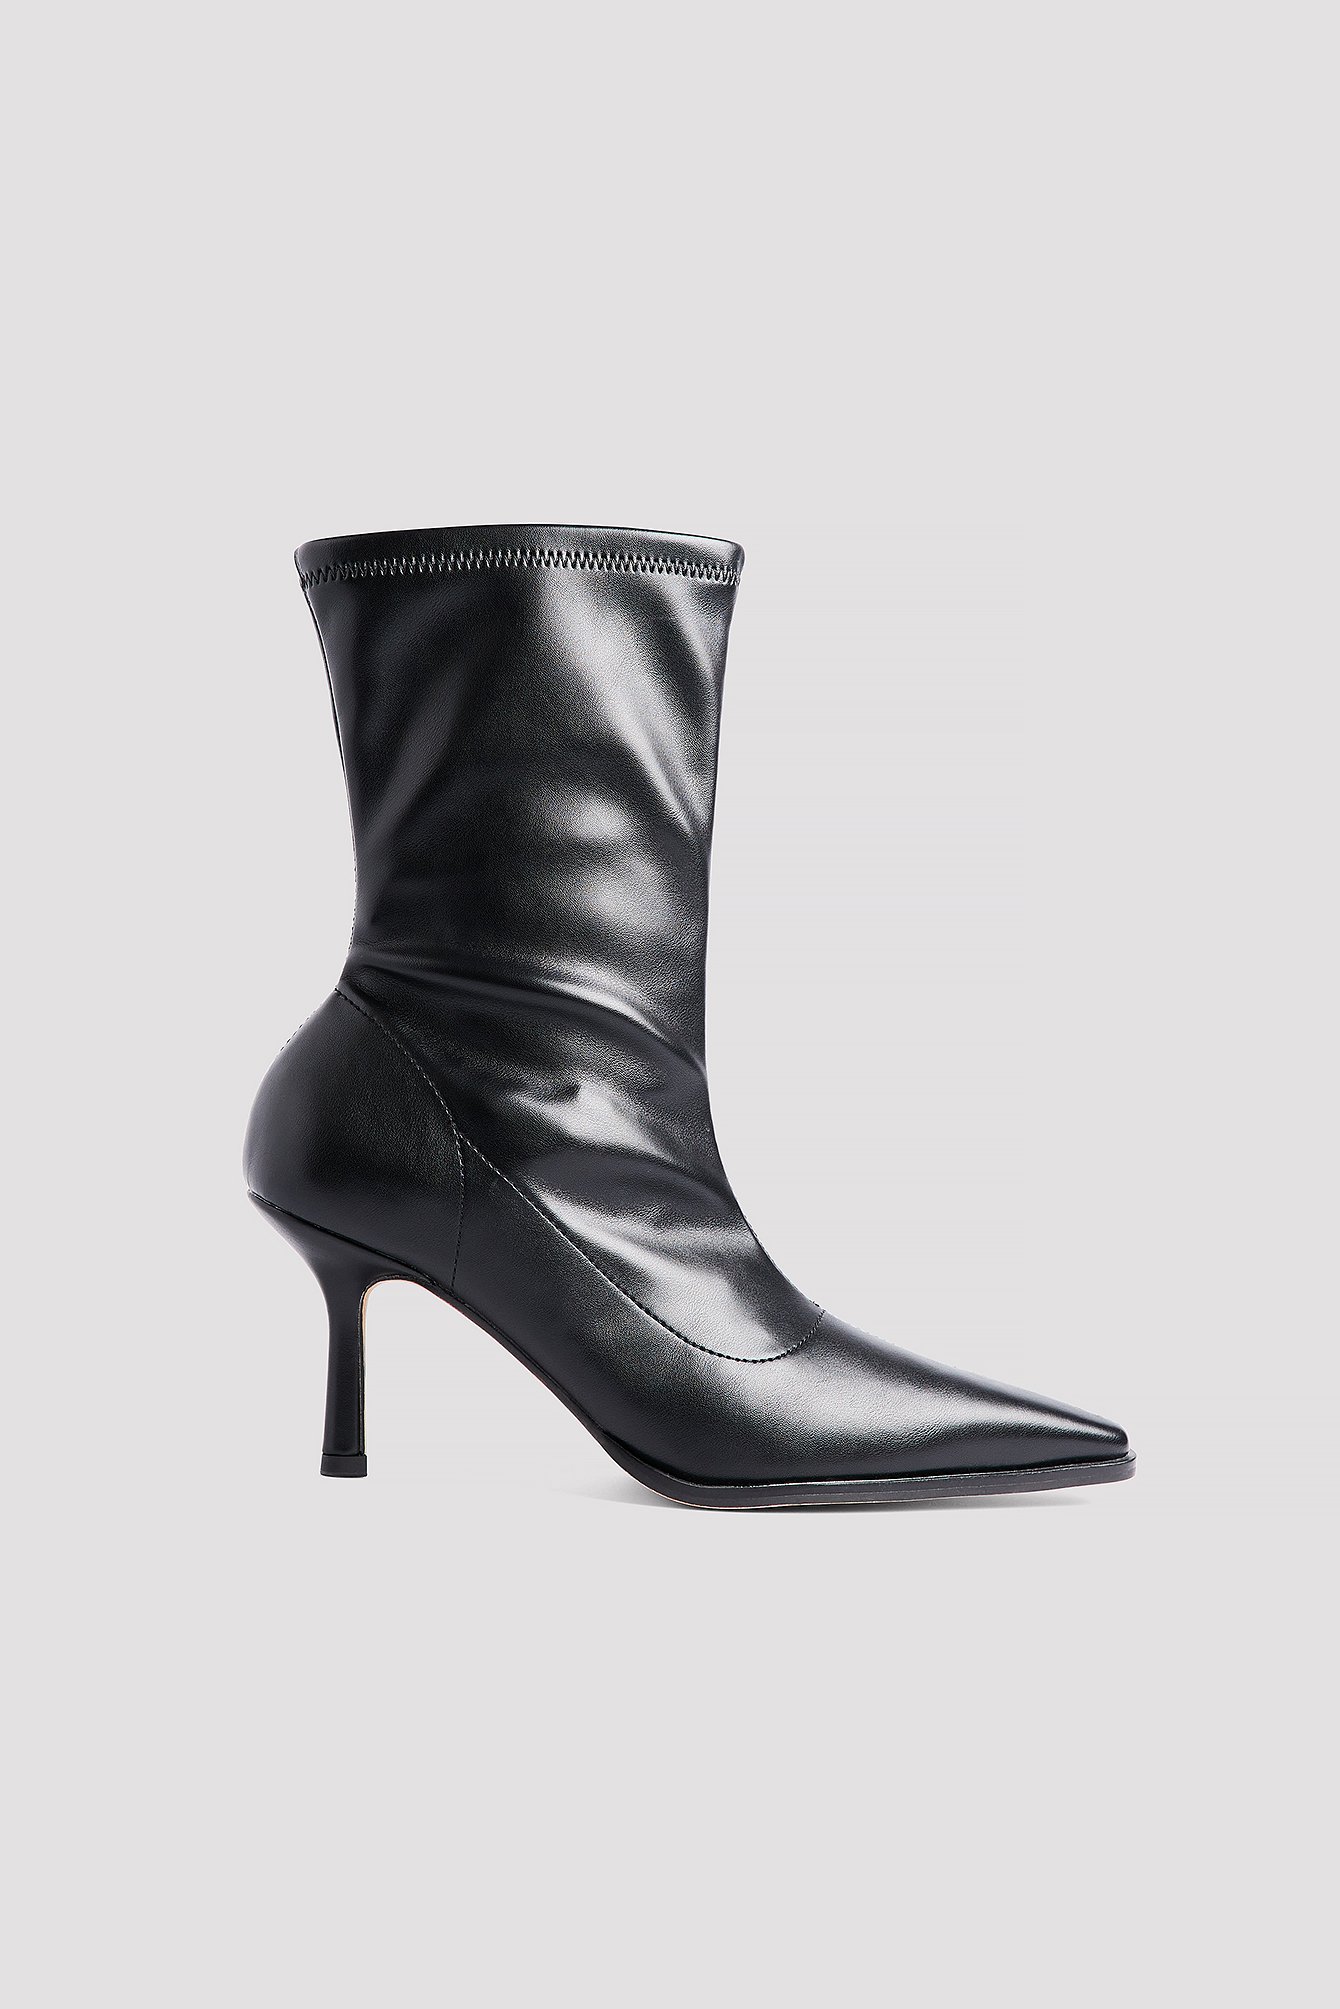 Ankle Boots | Women's Chelsea, Sock & Satin Boots | NA-KD